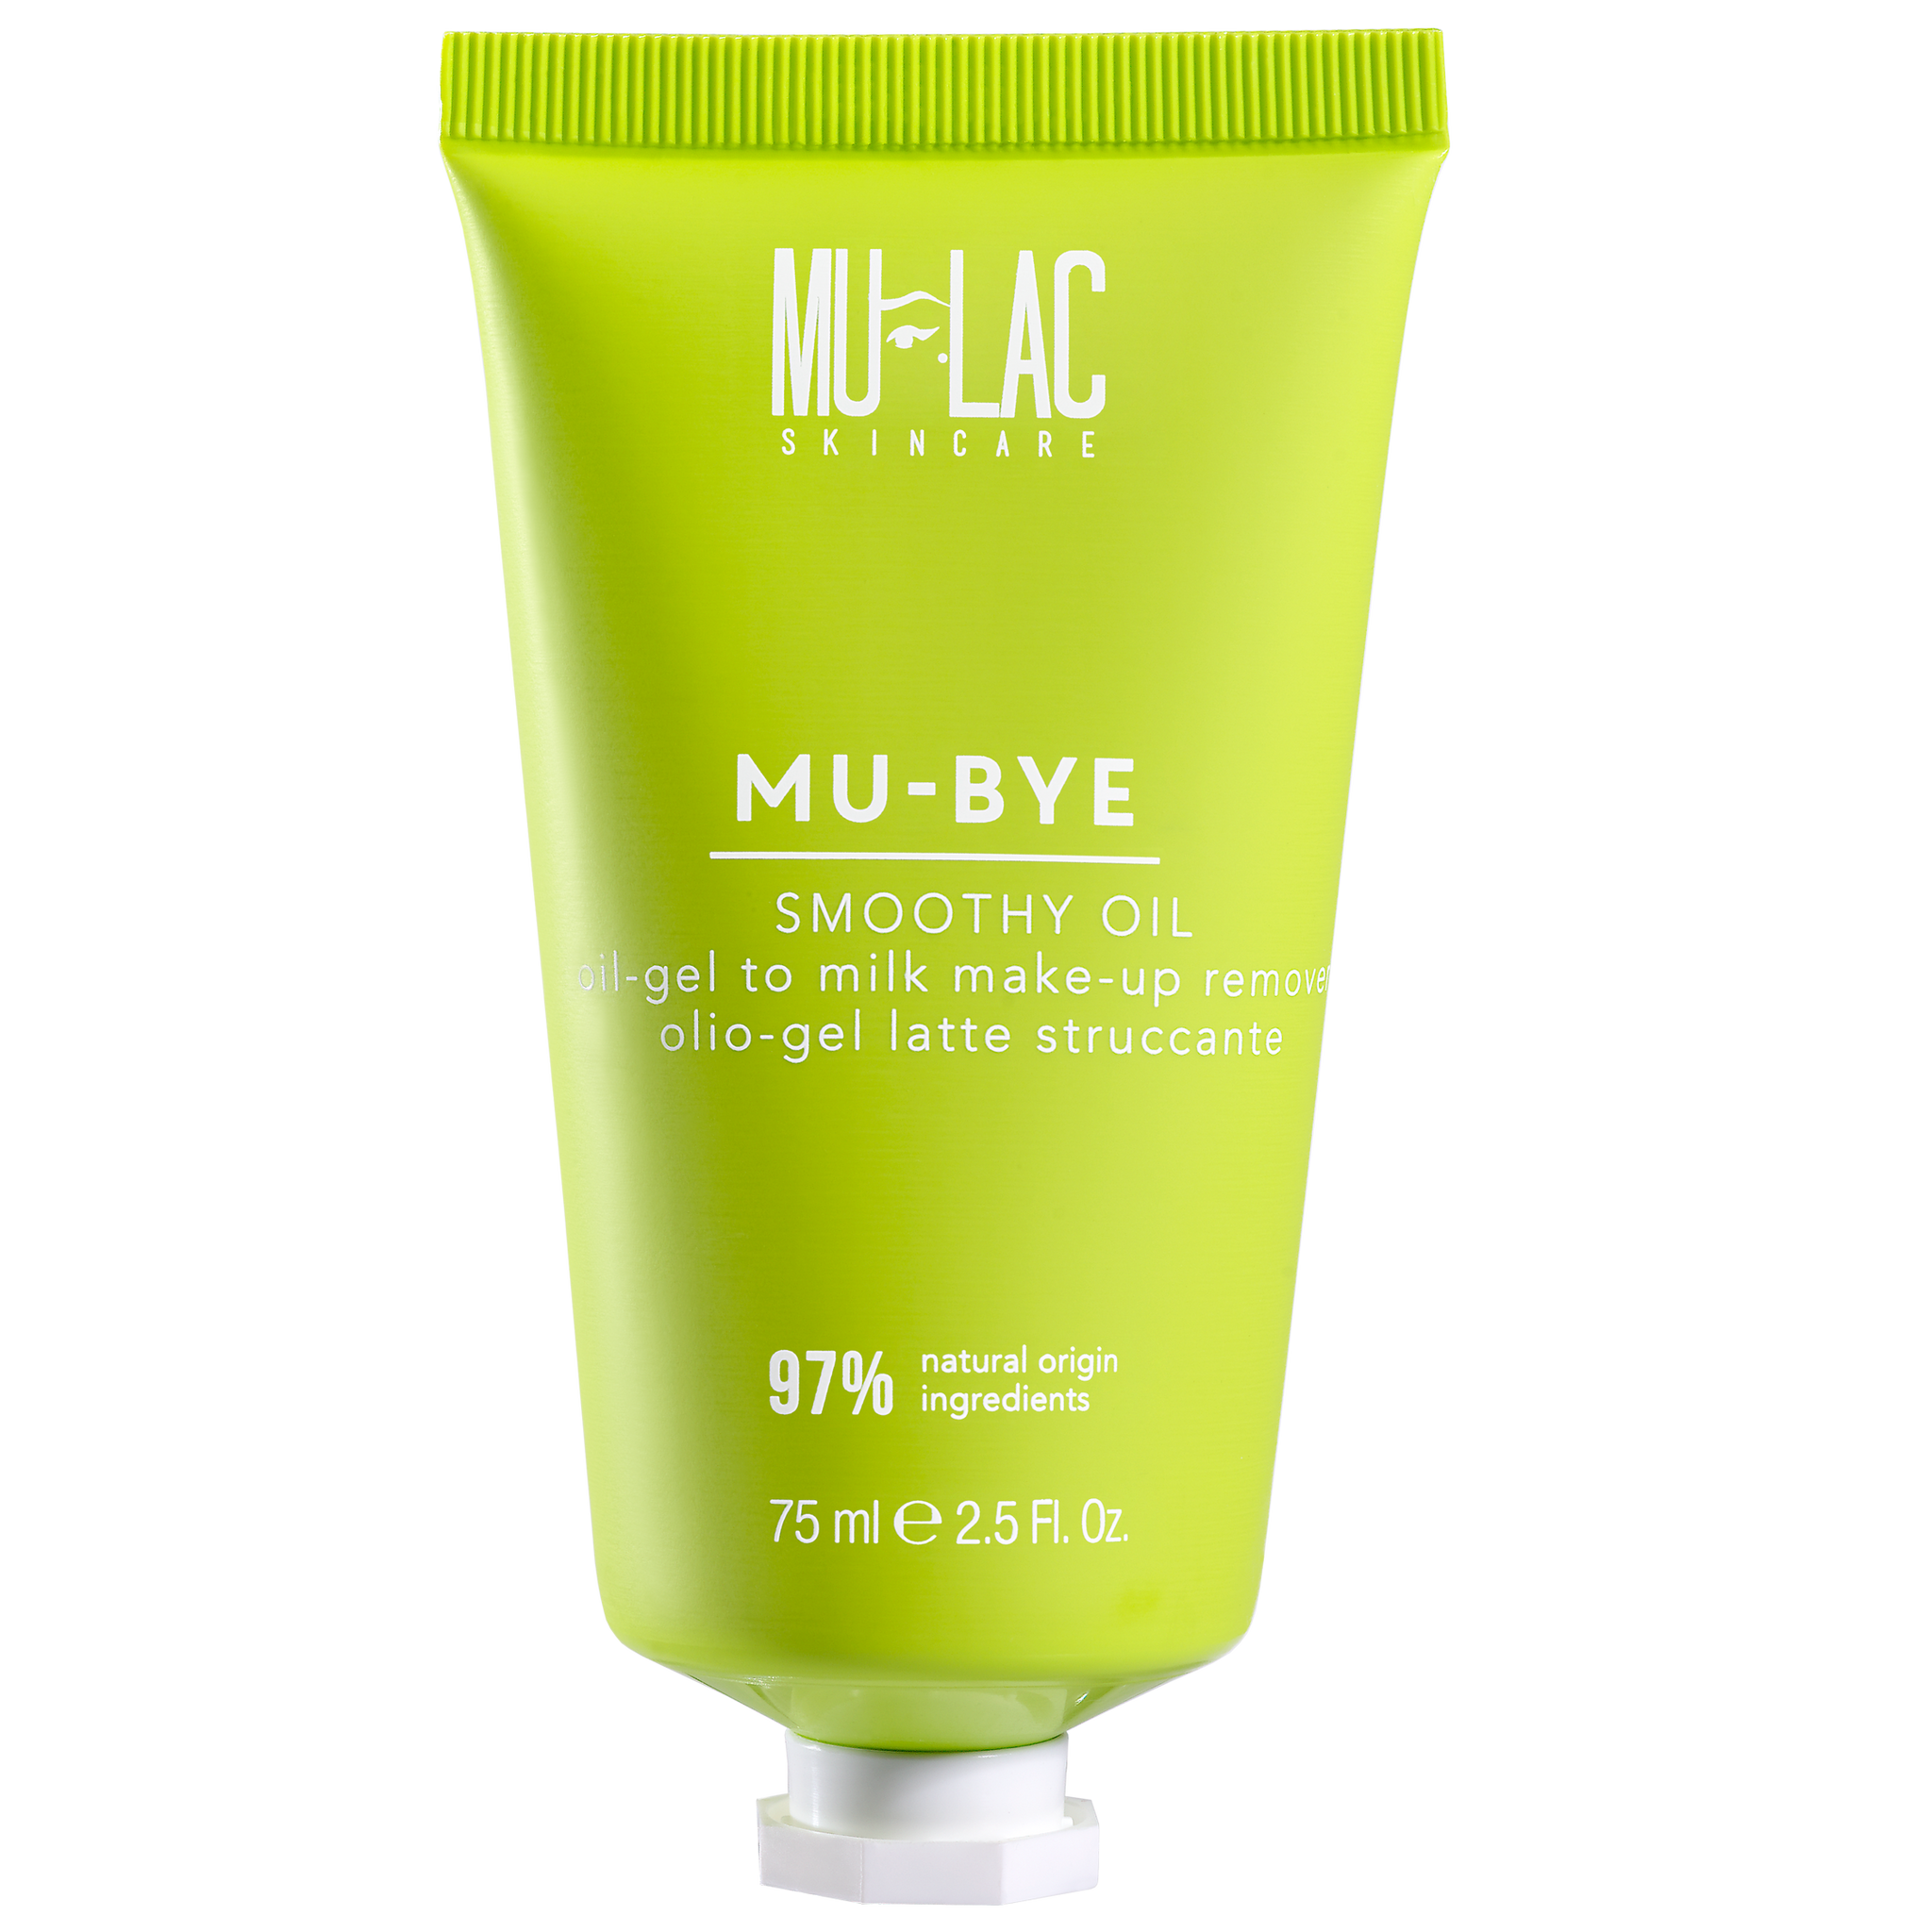 MU-BYE SMOOTHY OIL - OIL GEL TO MILK MAKE UP REMOVER